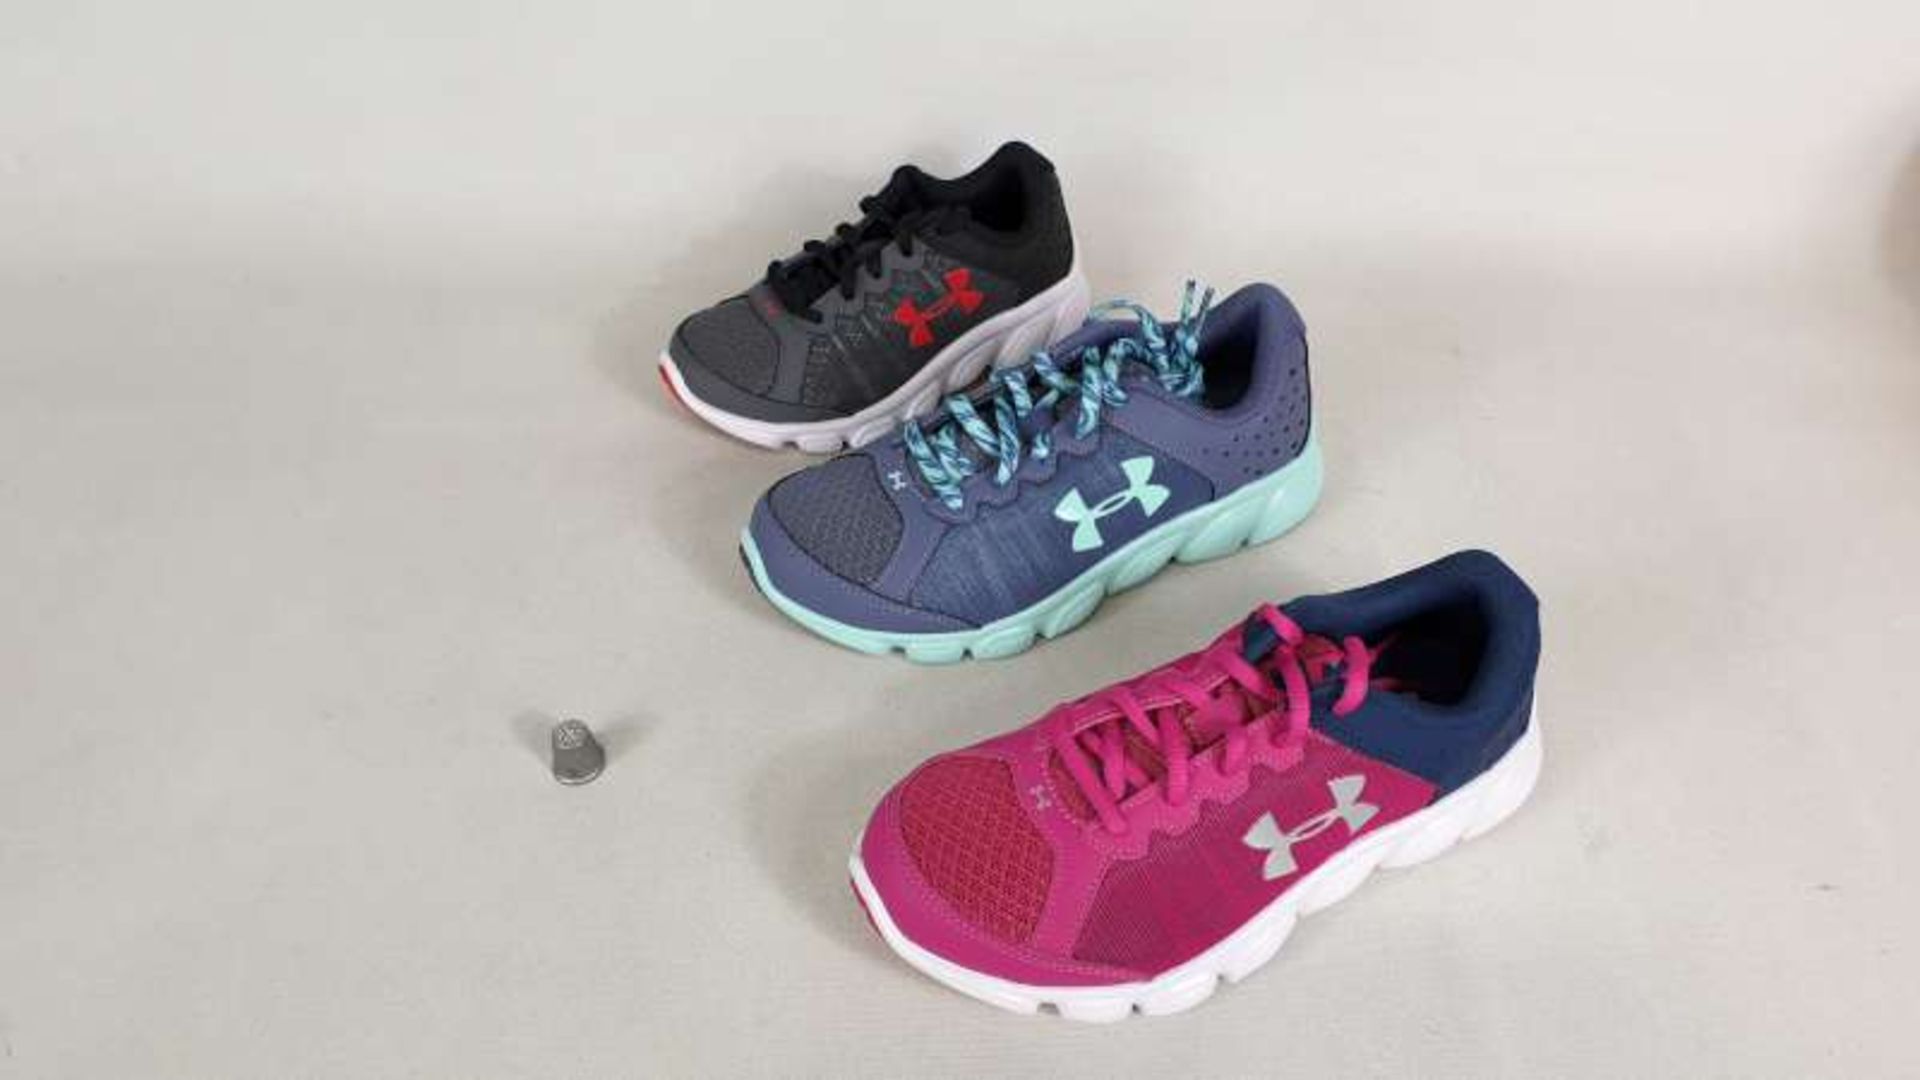 10 X BRAND NEW BOXED CHILDRENS UNDER ARMOUR TRAINERS IN VARIOUS STYLES SIZE 12.5